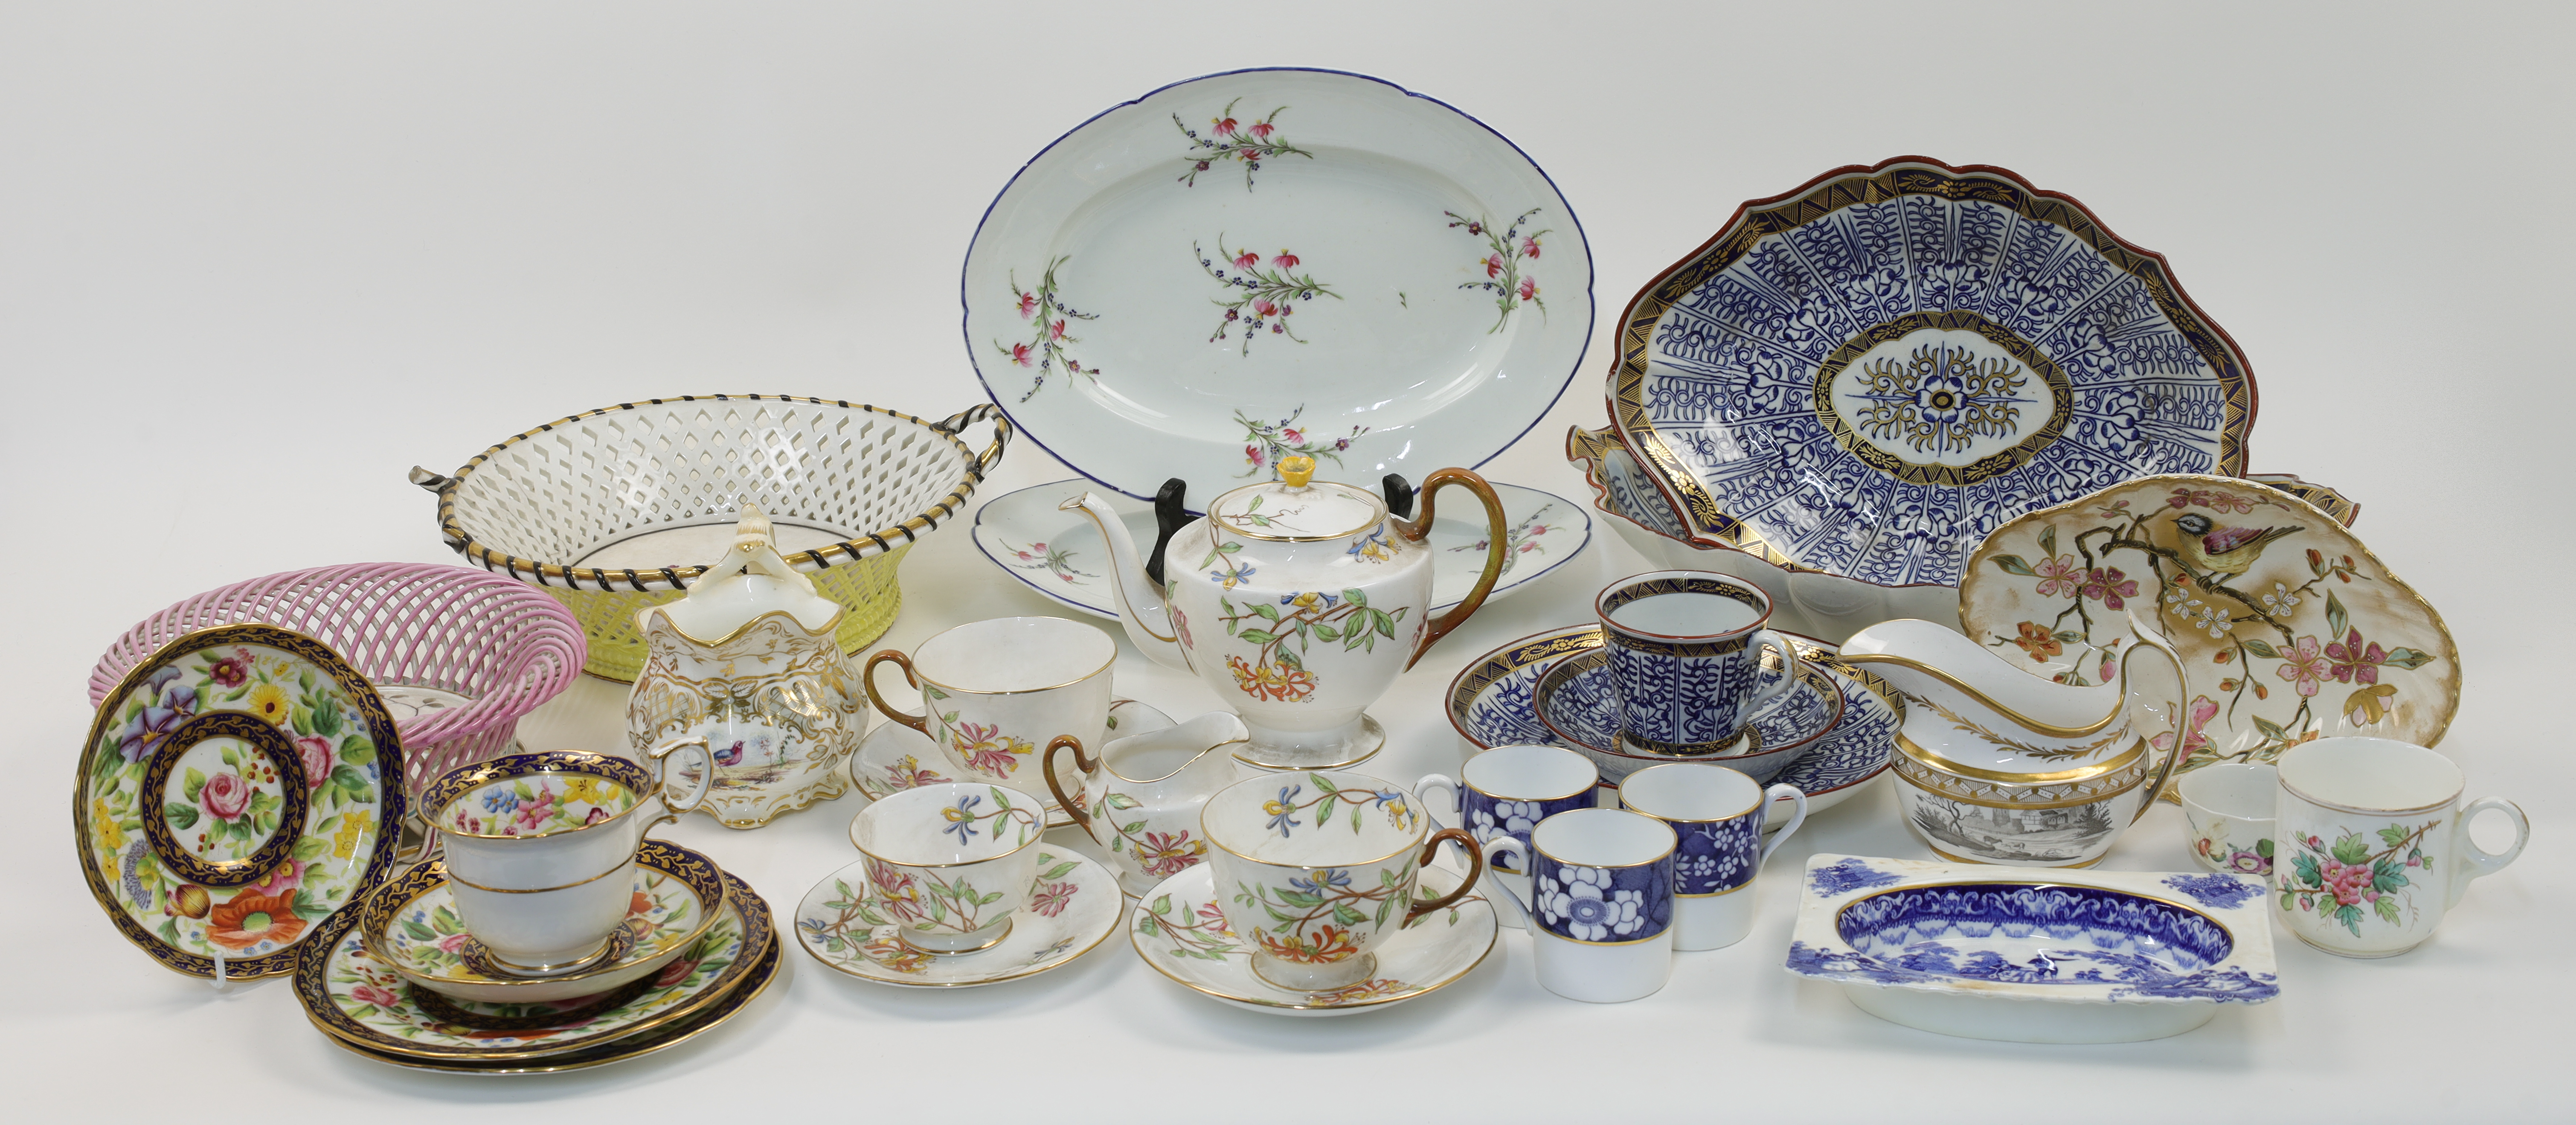 A quantity of miscellaneous porcelain tablewares, 19th - 20th centuries, various makers and regio...